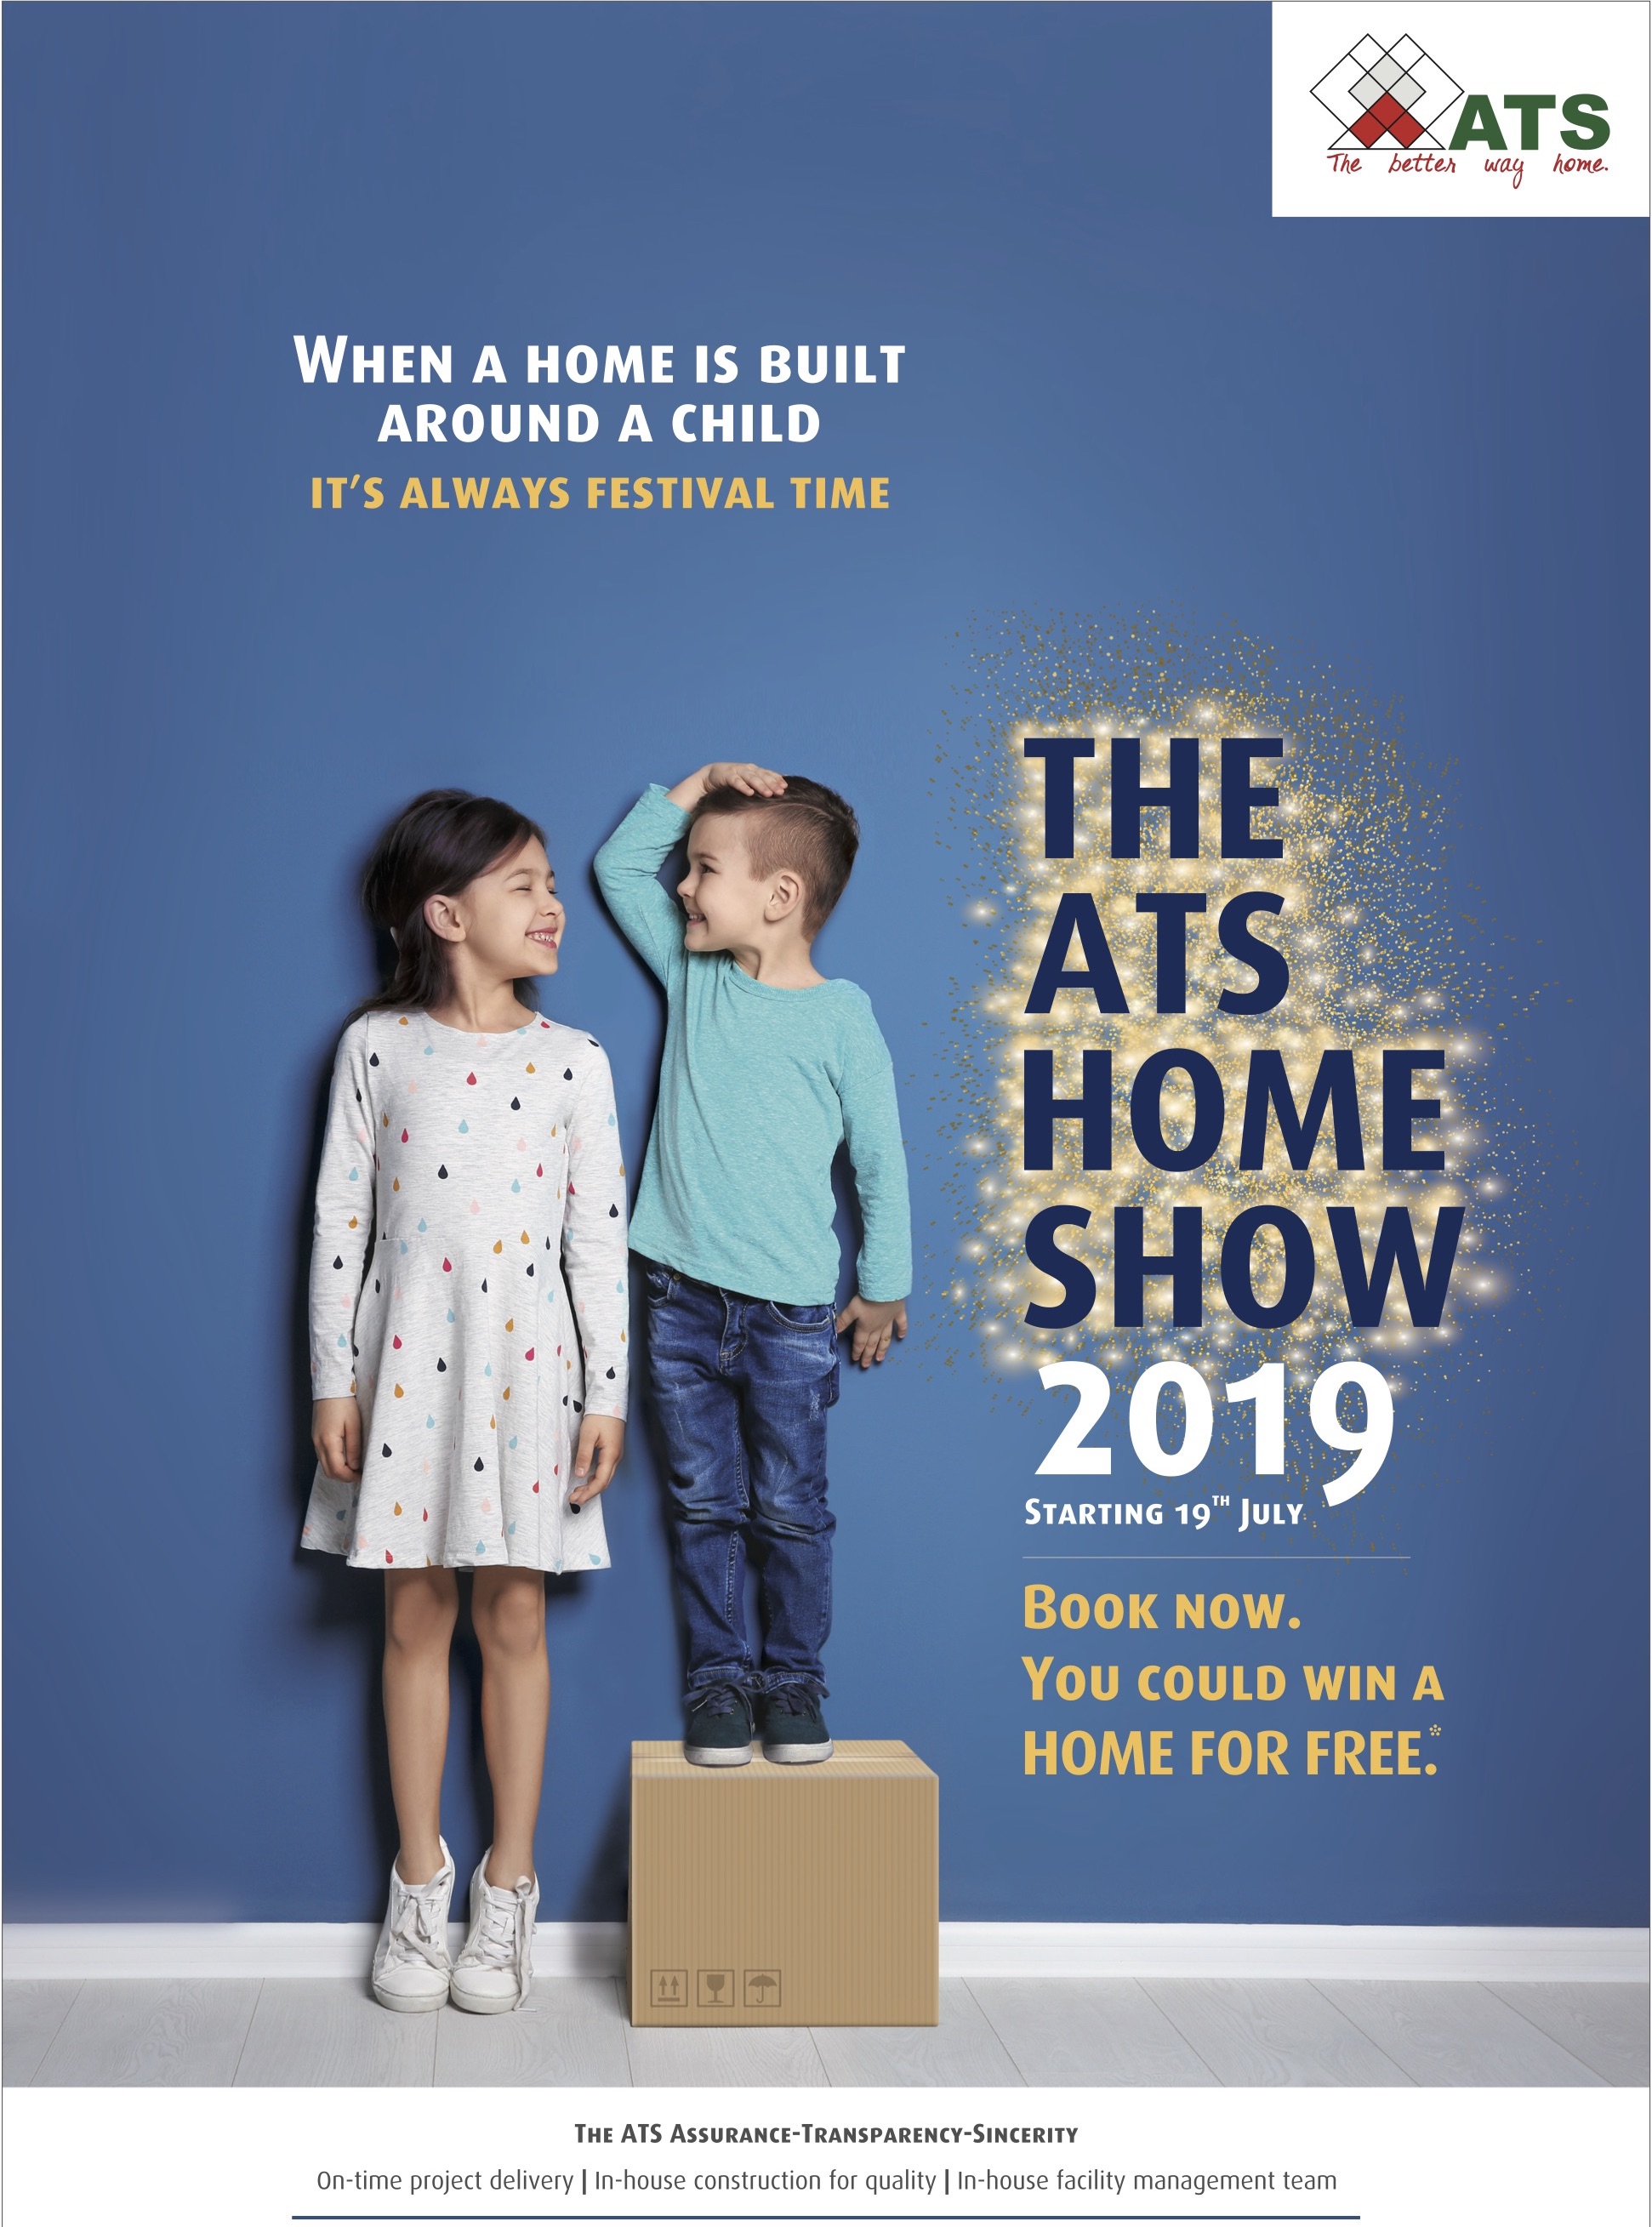 ATS Home Show Carnival, 2019